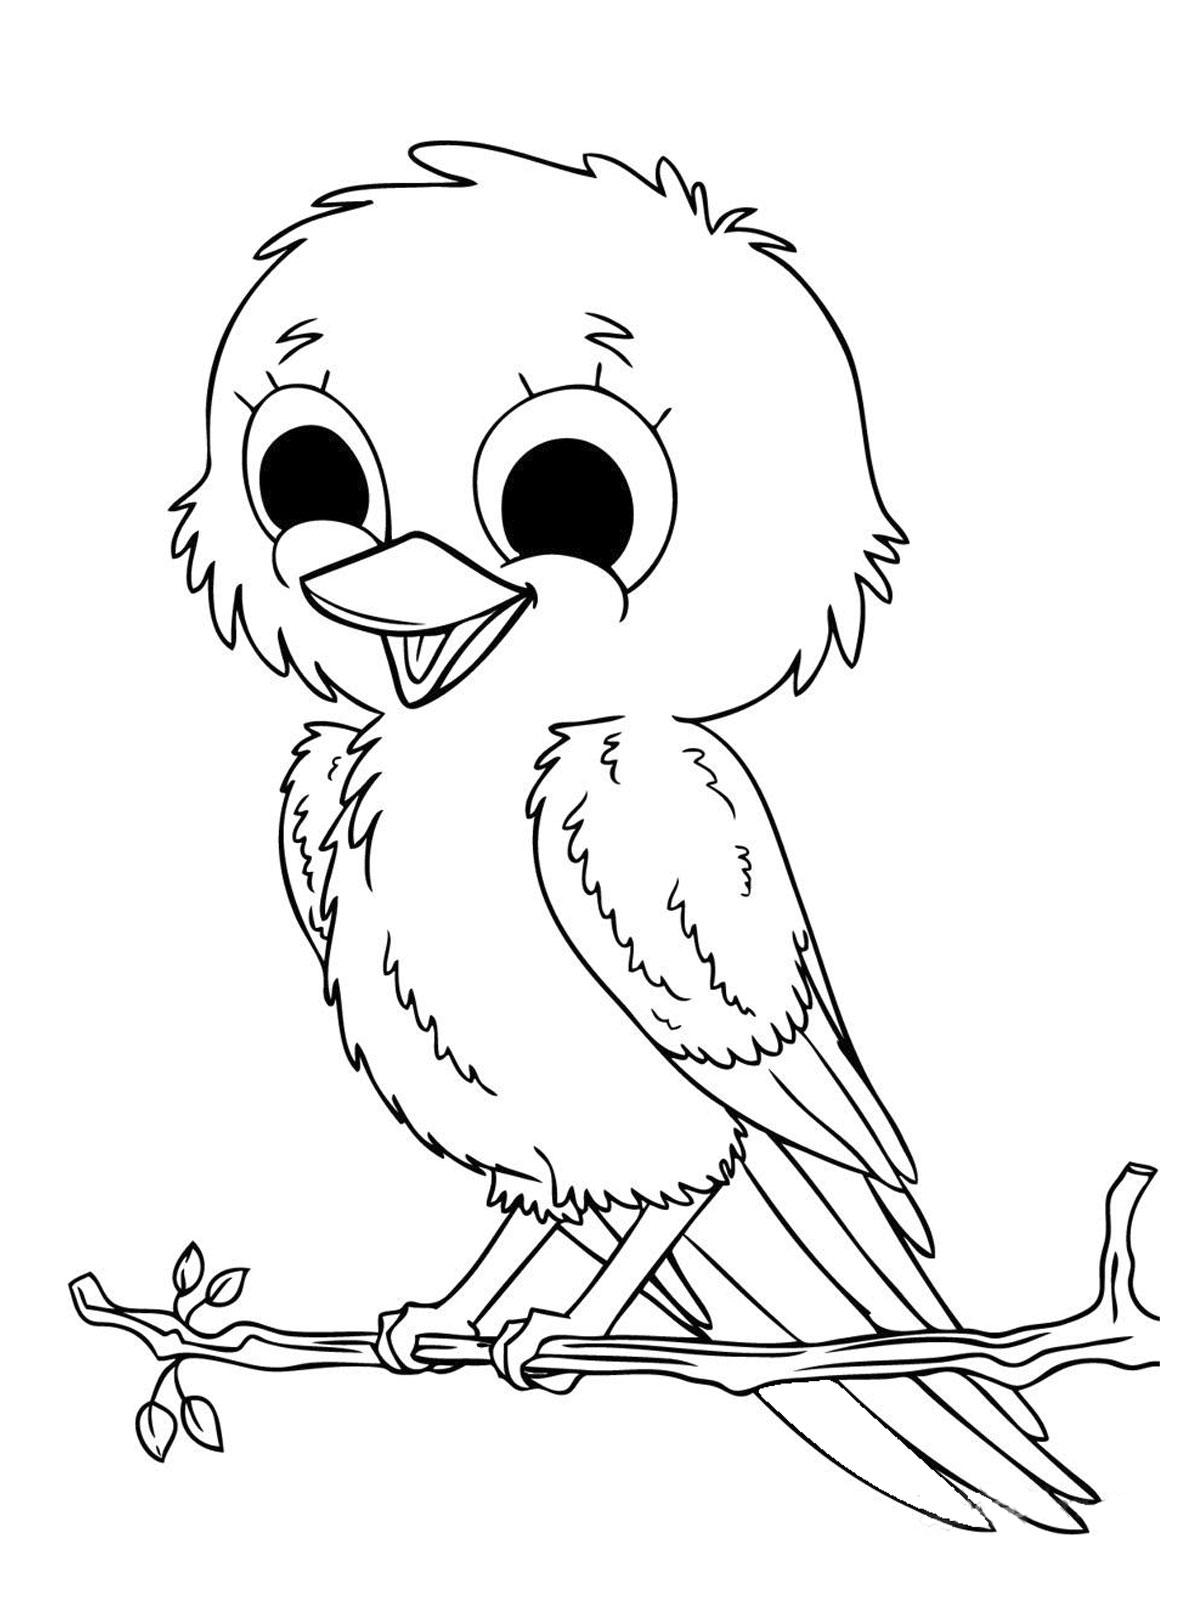  Baby Coloring pages | Coloring pages for girls |  #25